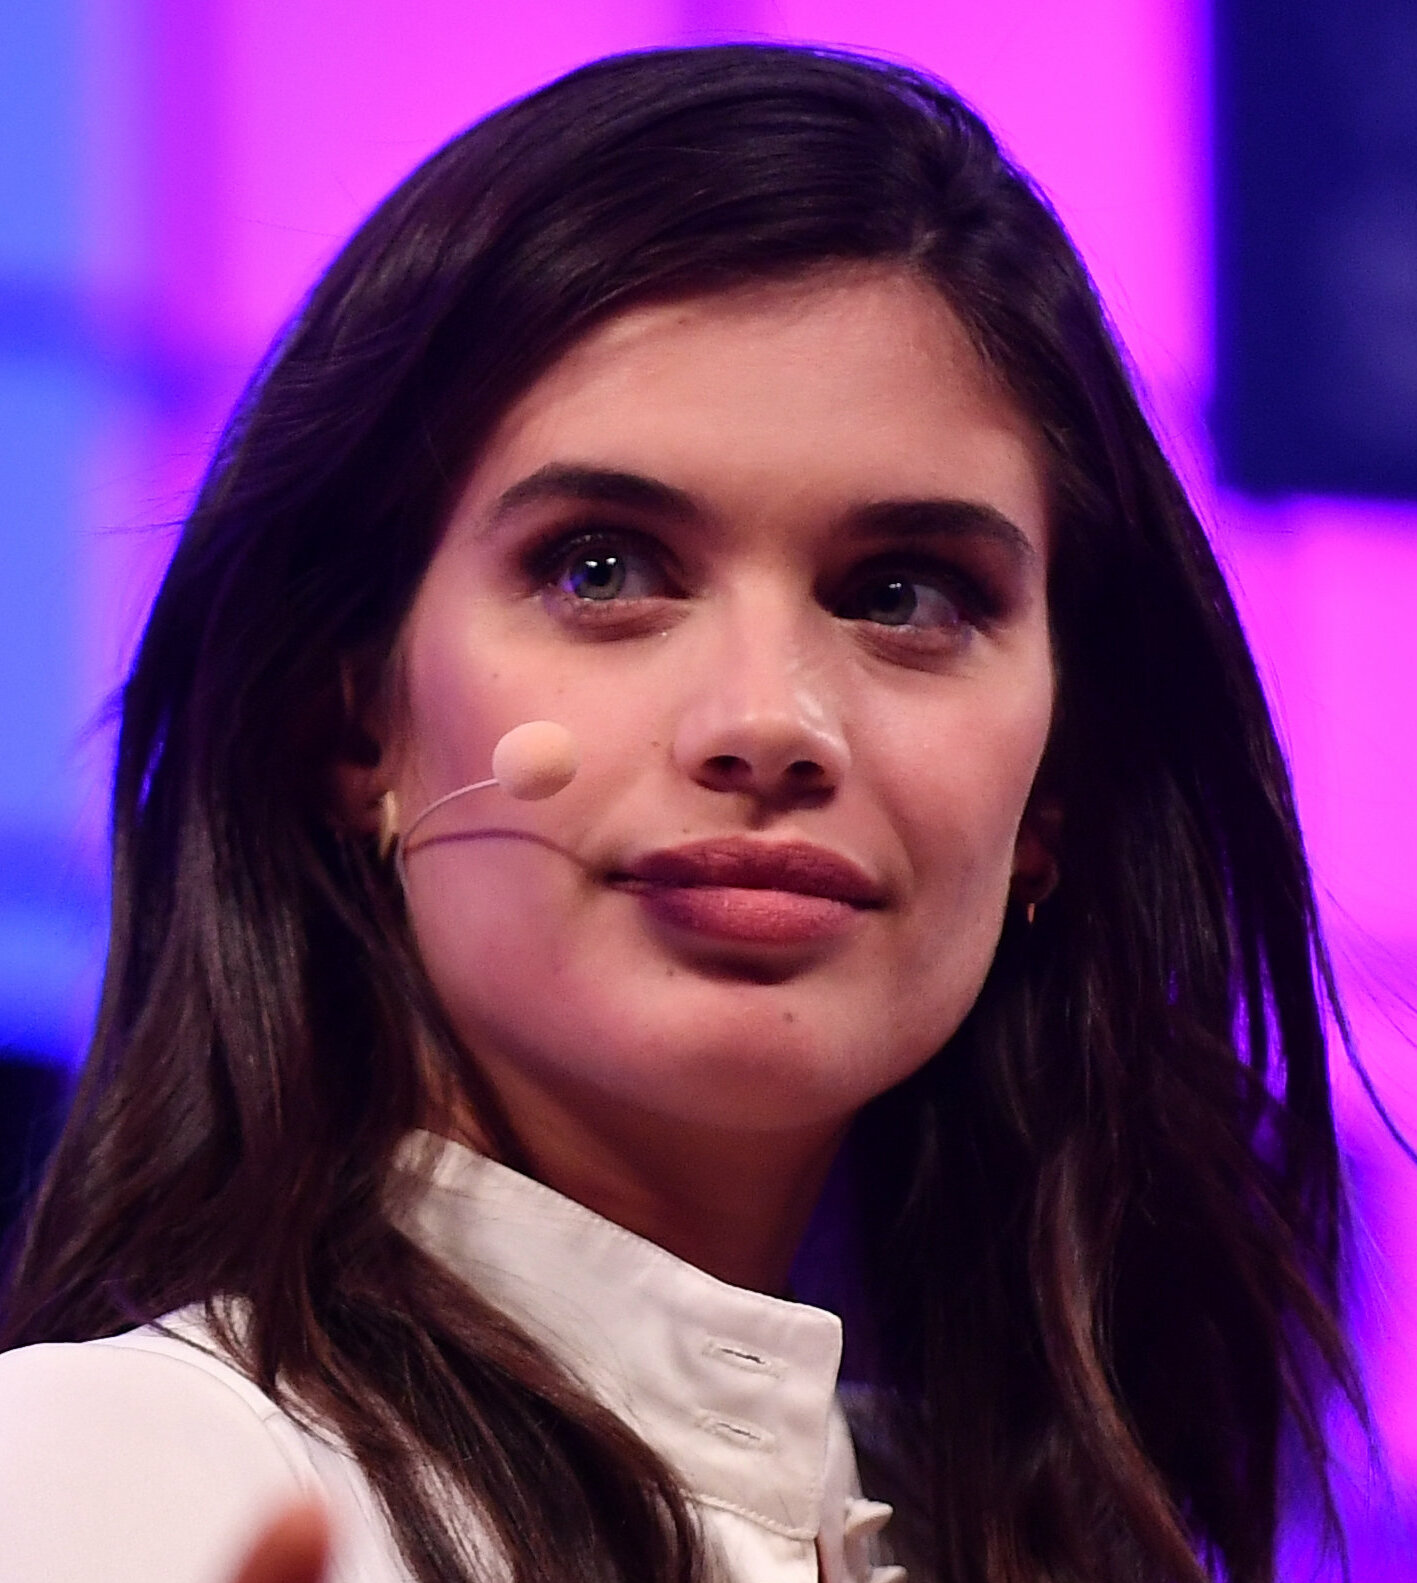 The 30-year old daughter of father (?) and mother(?) Sara Sampaio in 2022 photo. Sara Sampaio earned a  million dollar salary - leaving the net worth at 0.5 million in 2022